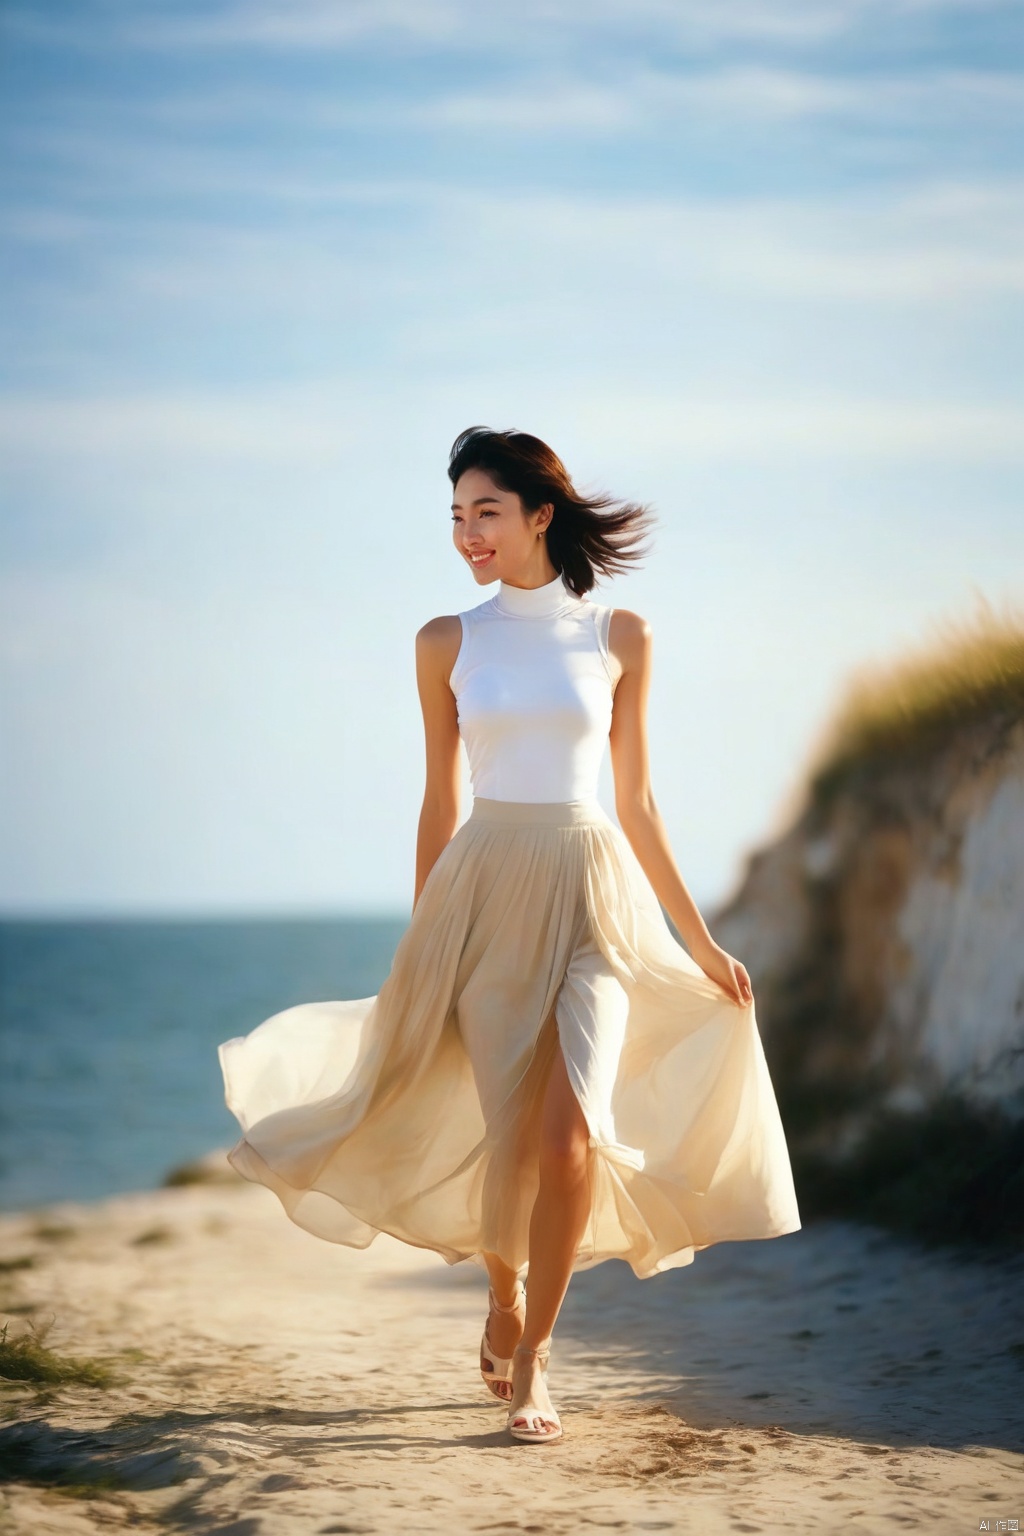 1 girl, (bright eyes, skin kissed by sunlight, carefree expression), fashion, (upper body wrapped in white, lower body colored long skirt), playful posture, smile, plump body, slender legs, young girl's body proportion, beach background, lighthouse, soft sea breeze, dynamic composition, prime time lighting, blurred background, rich colors, fine details, surrealism, 50mm lens, relaxed atmosphere. Portrait photography, 35mm film, naturally blurry, , g010, ((poakl)), qipao, bailing_model